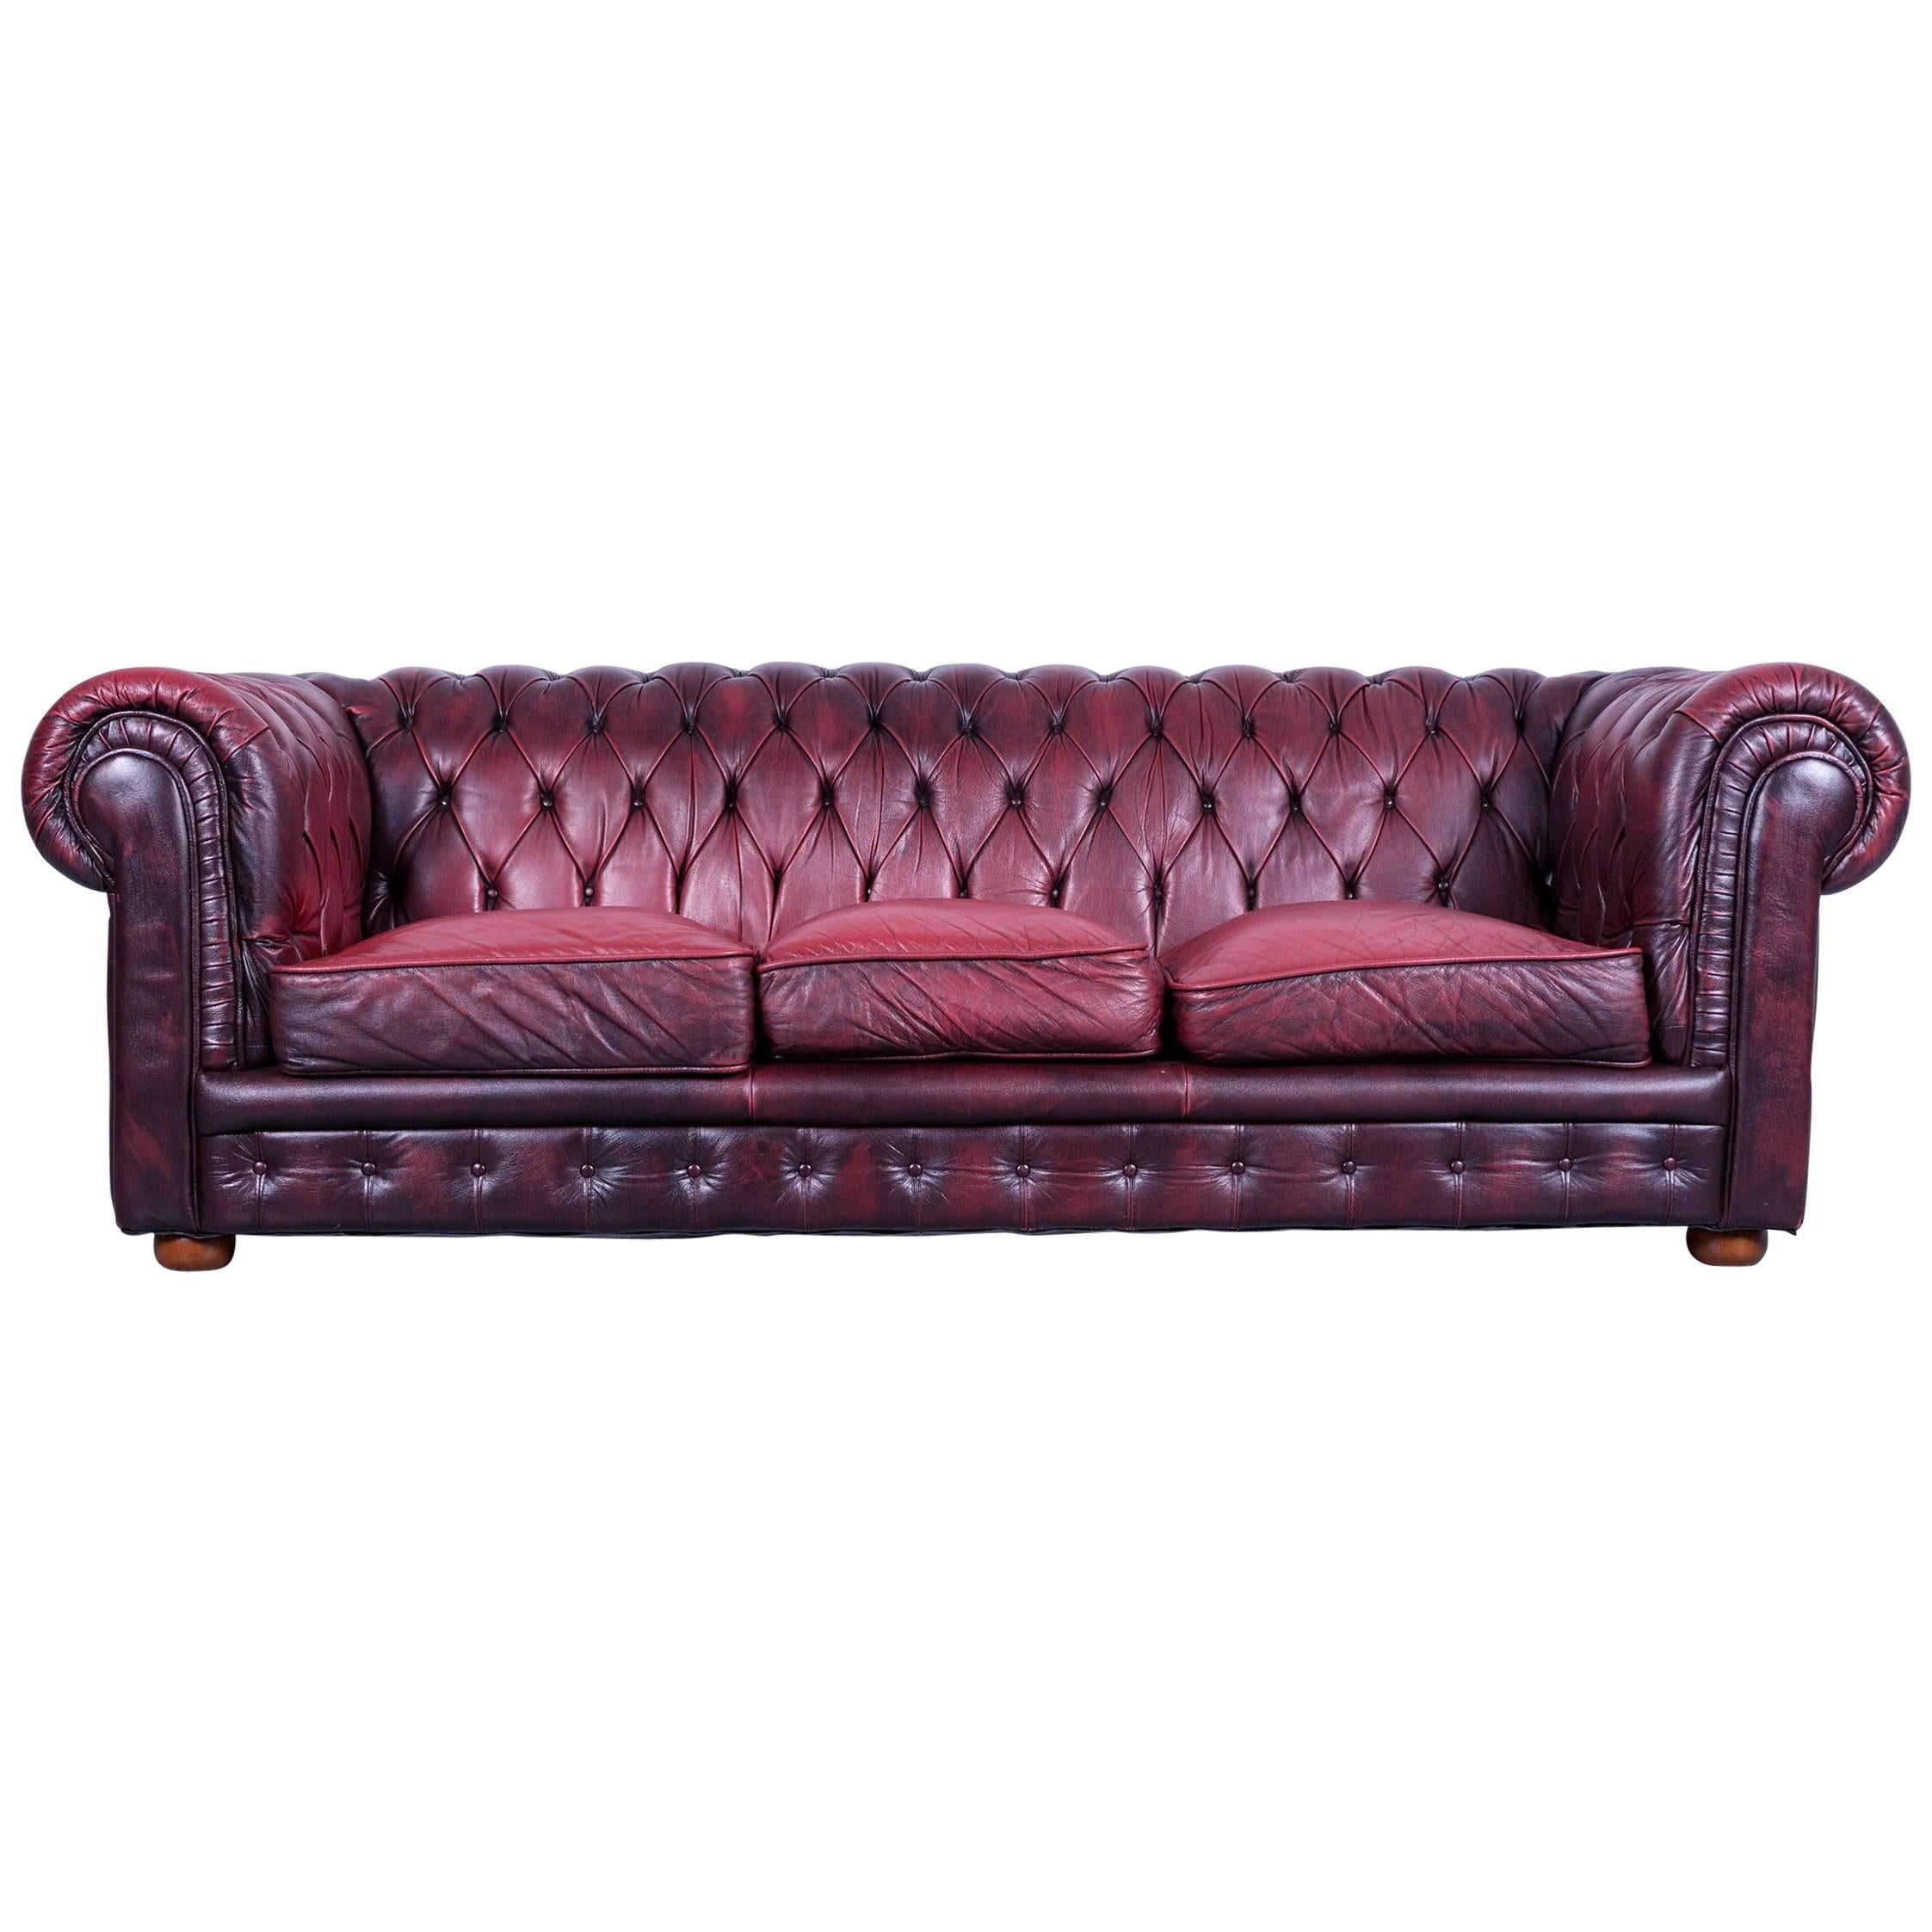 Chesterfield Three-Seat Sofa Red Leather Couch Vintage Retro Rivets